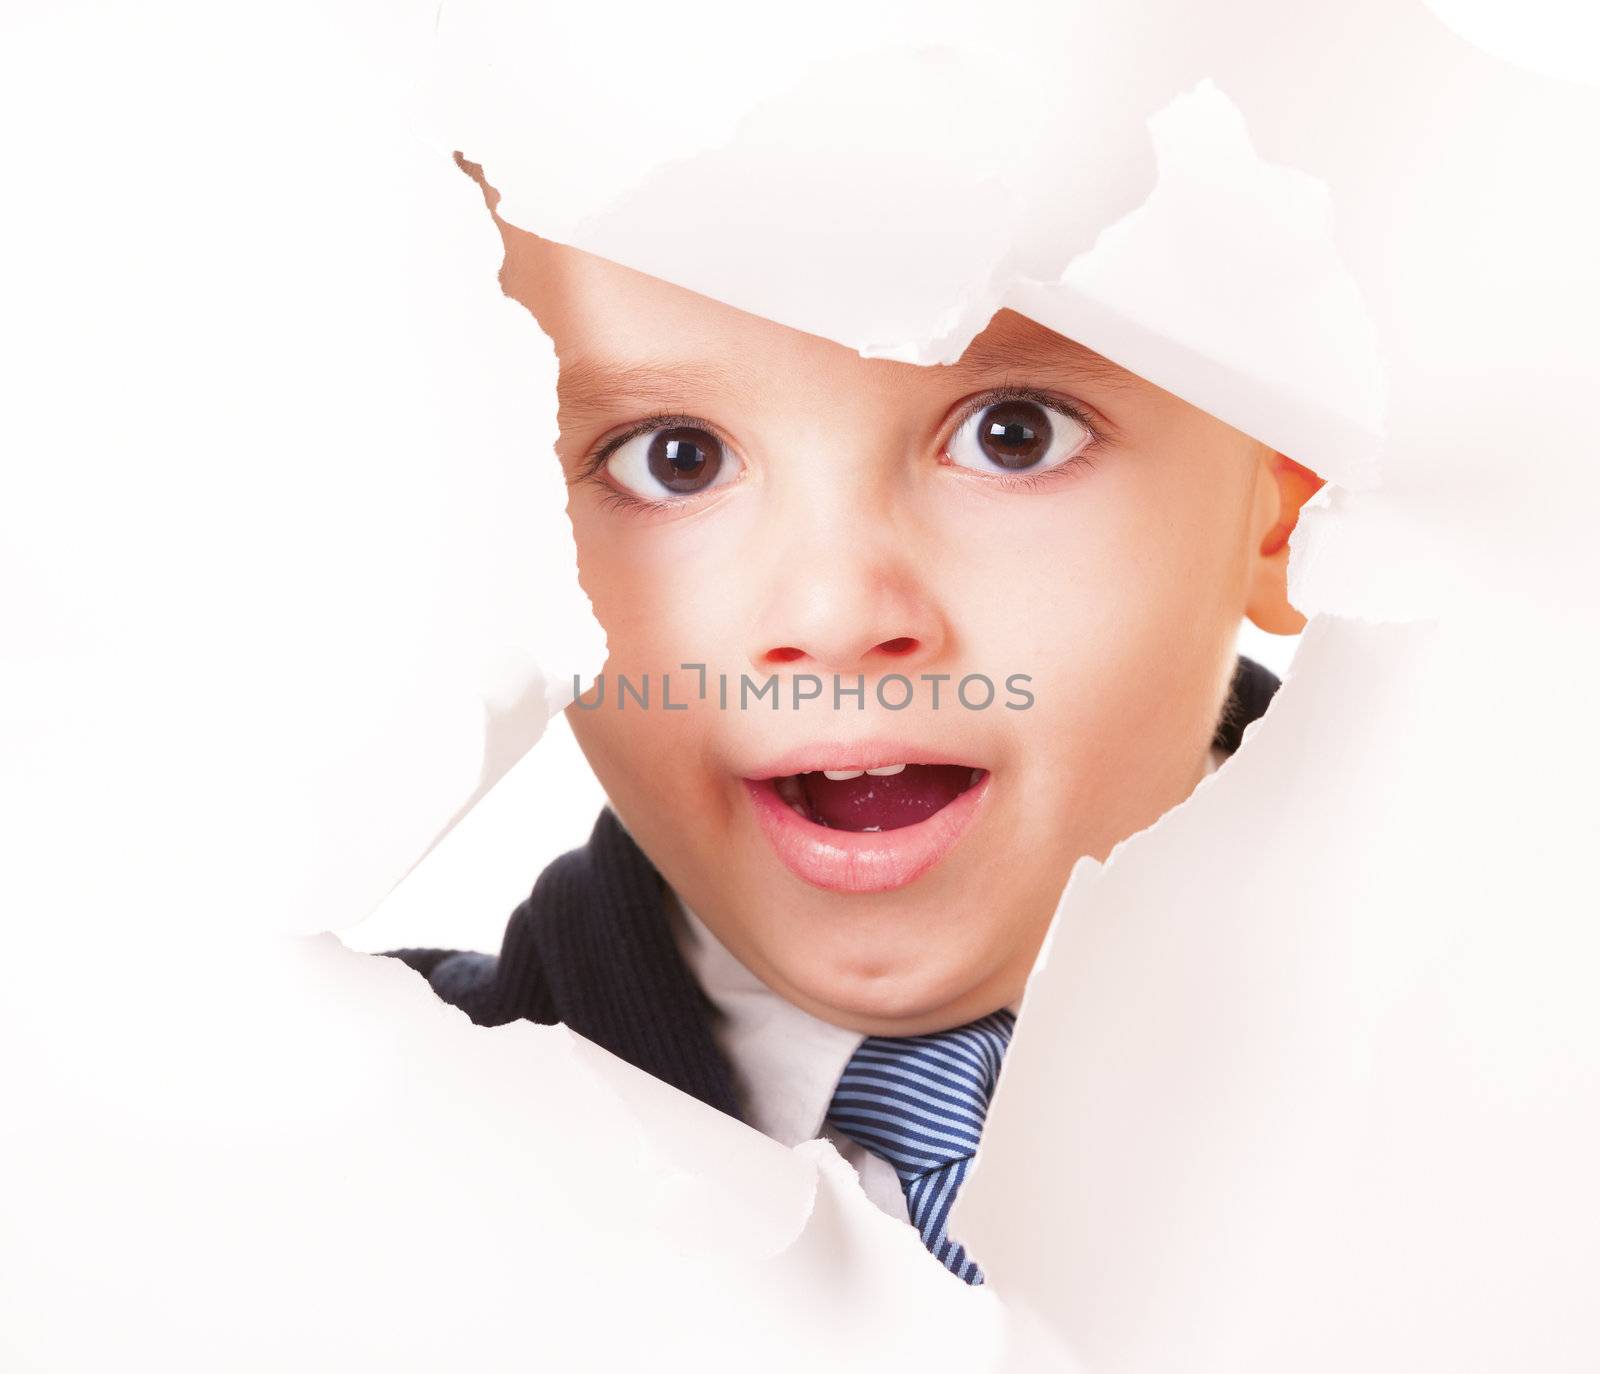 Yawning kid looks through a hole in white paper by iryna_rasko